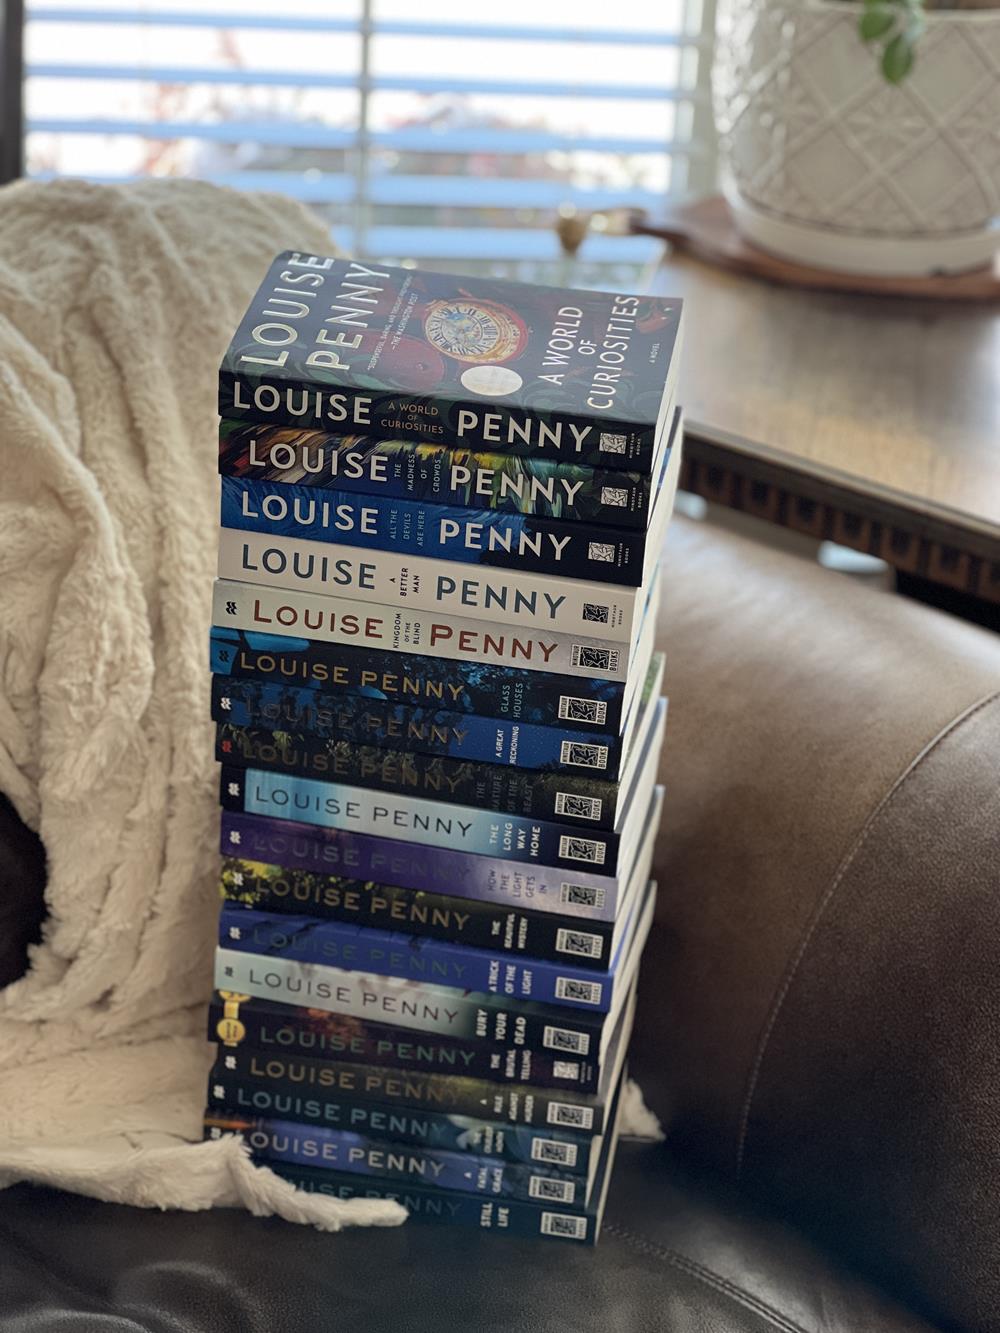 Louise Penny books in order in a stack